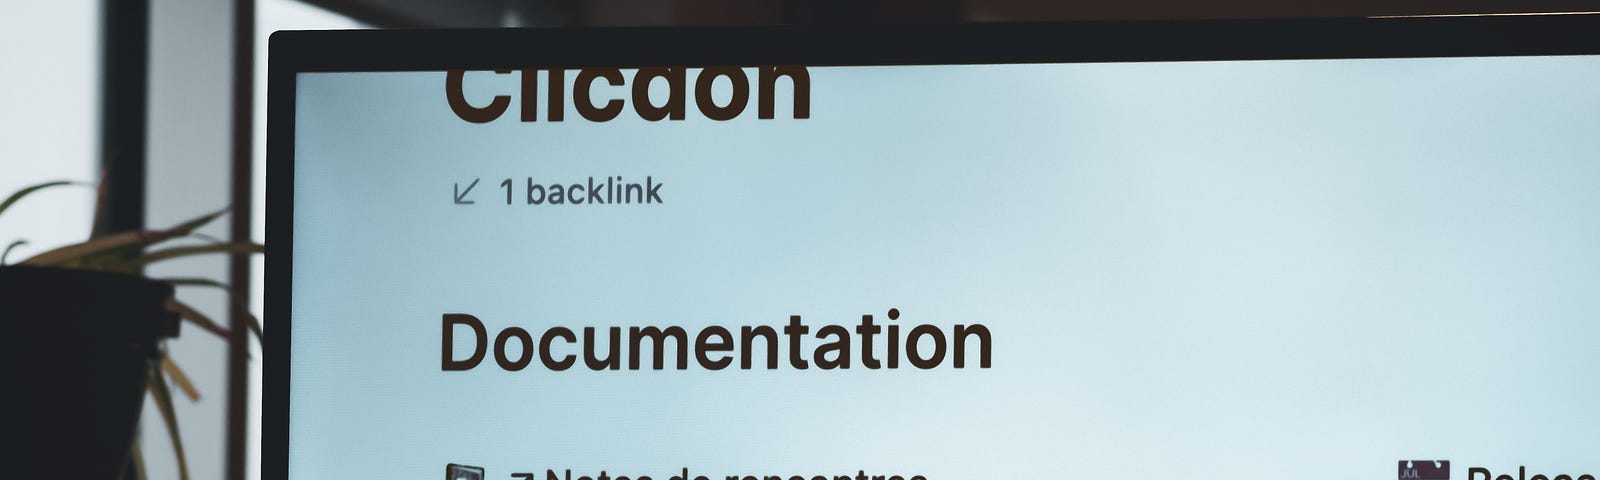 A sign showing documentation with various subfolders.